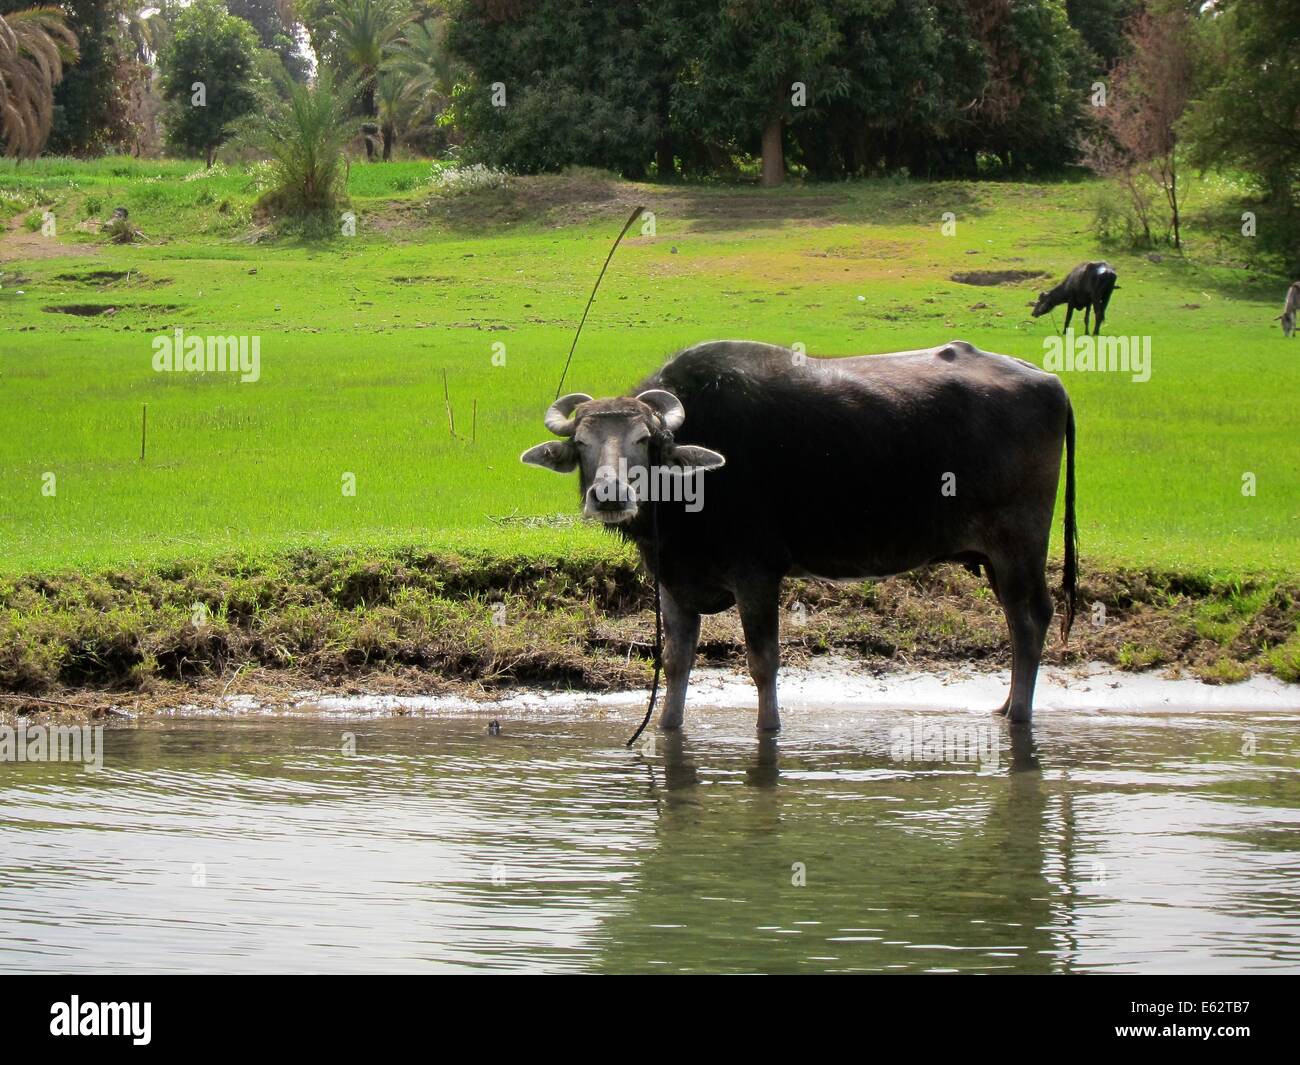 Buffalo drinking from the Nile River Stock Photo